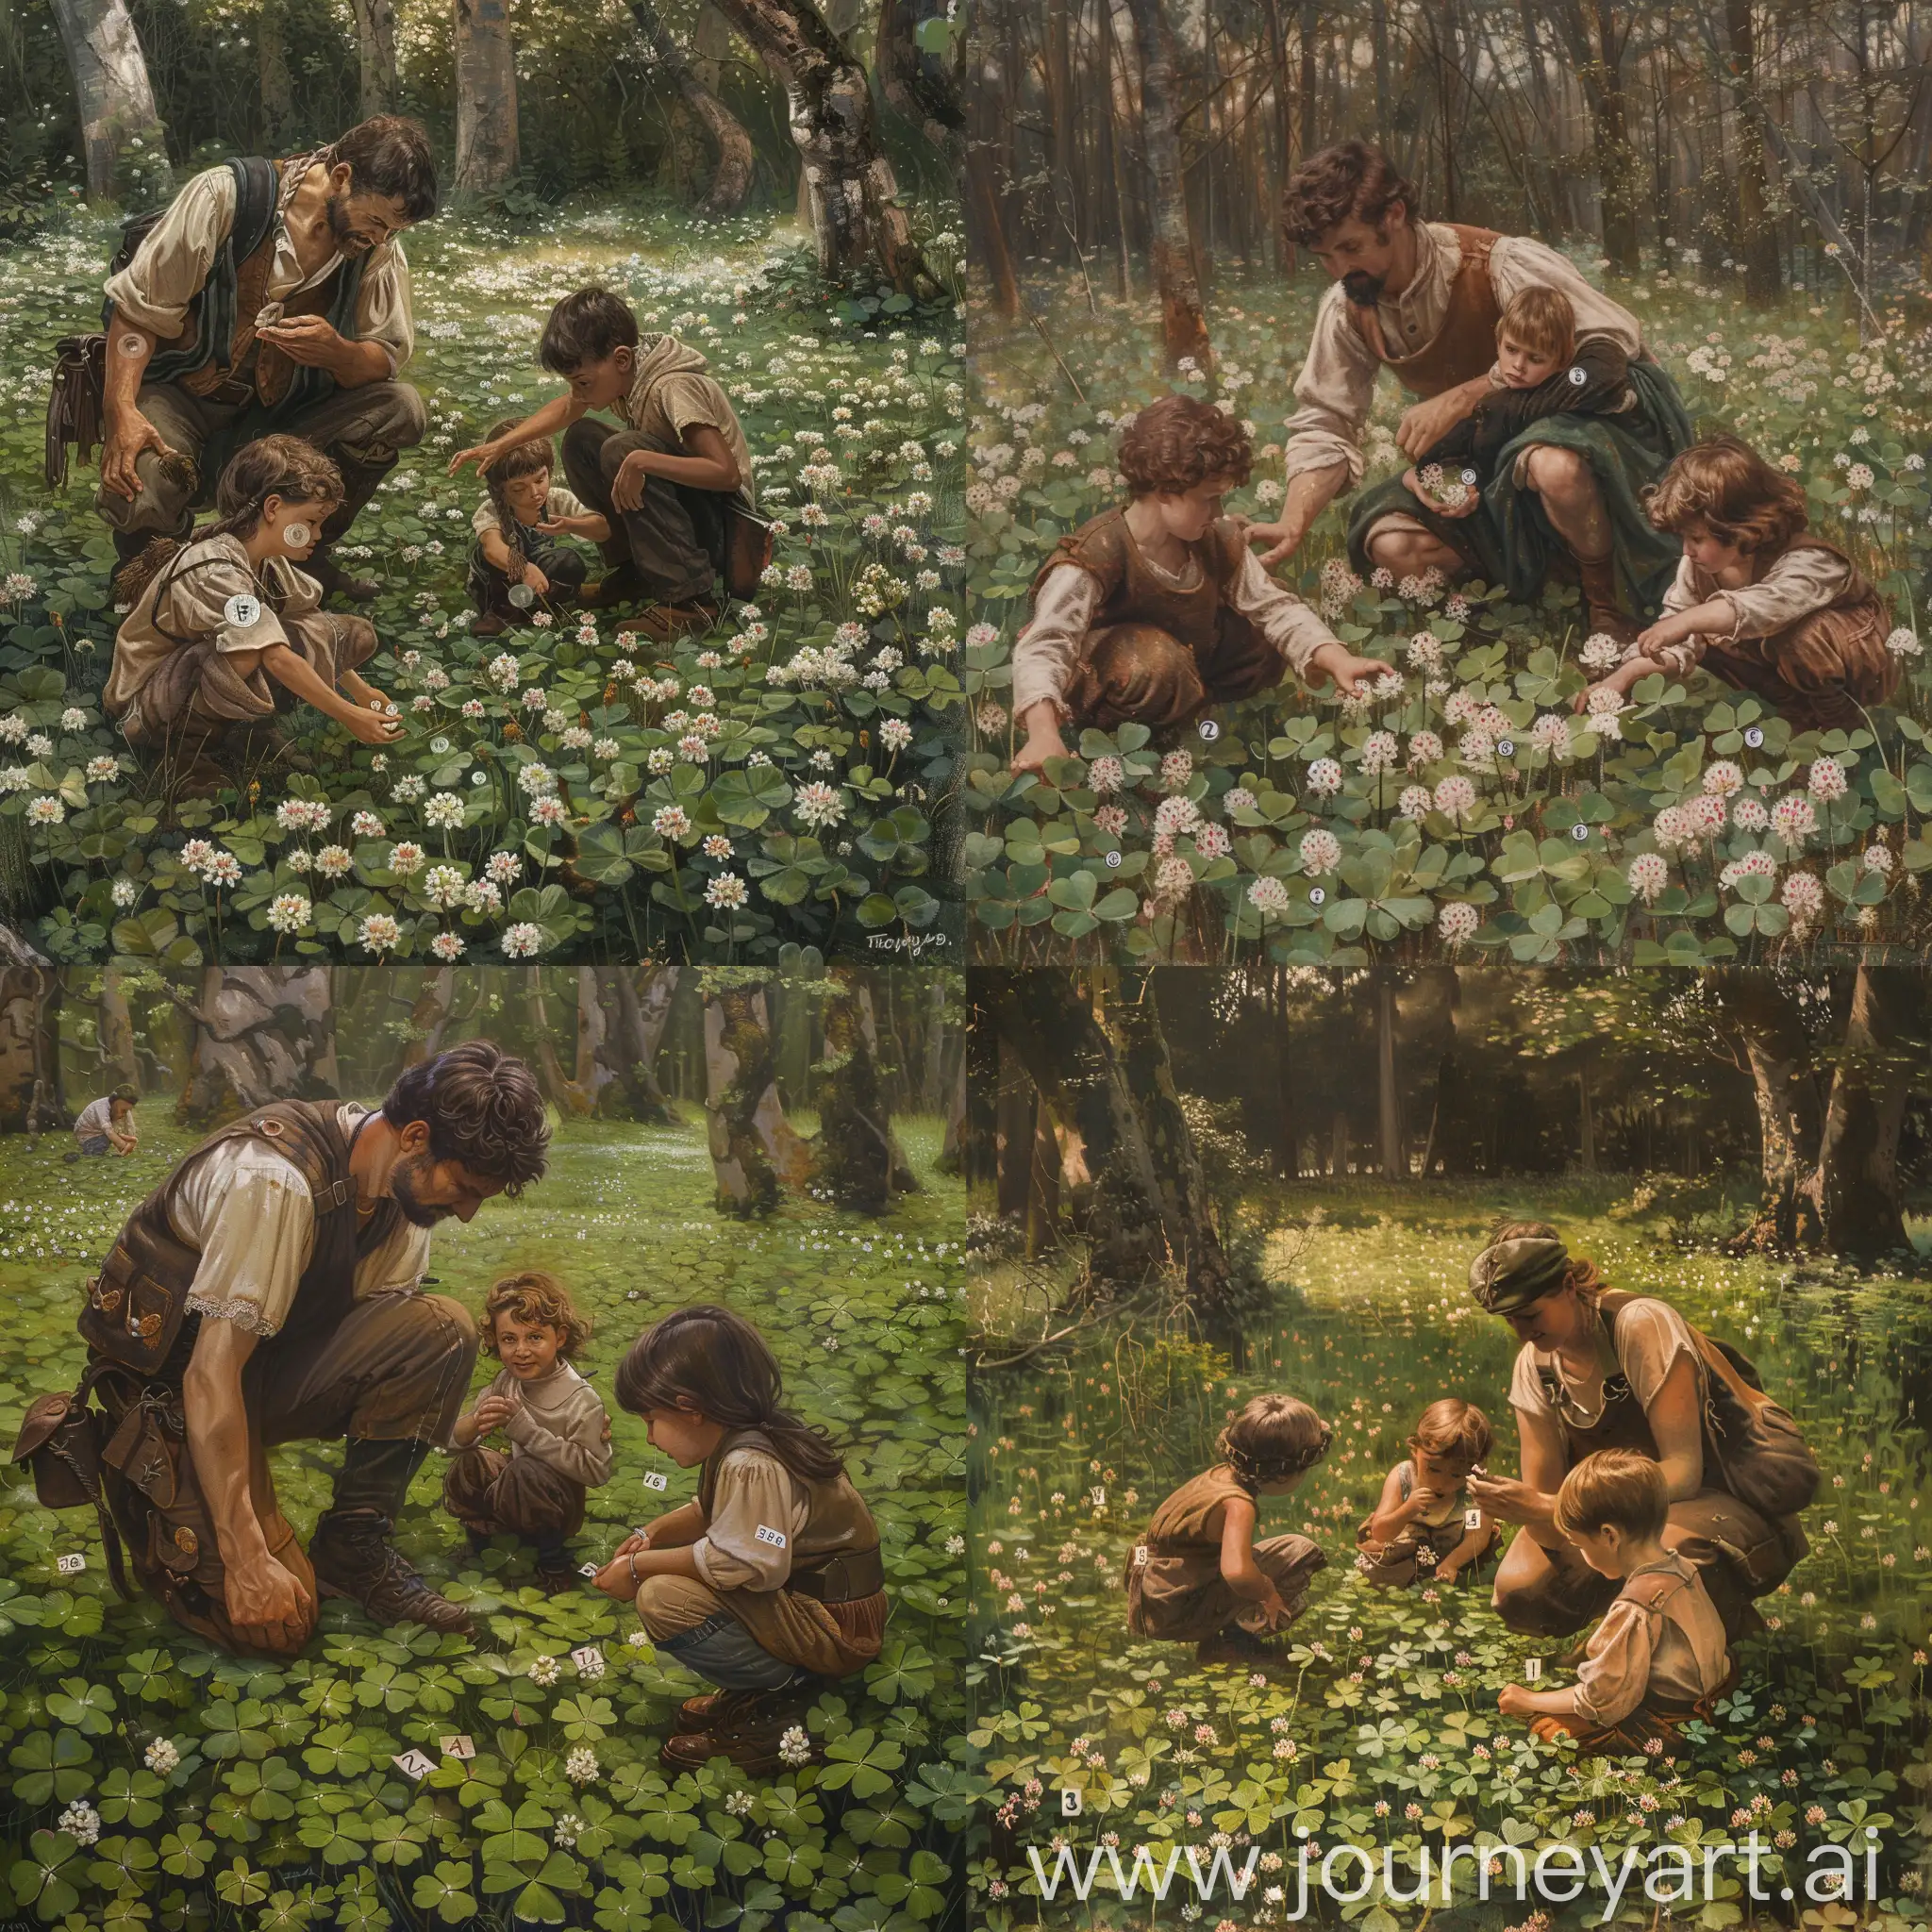 One adult and two children exploring a forest, dressed in rustic style, in a wide field of clover blossoms, squatting and engrossed in observing the clover blossoms, each blossom is labeled with a number. --v 6